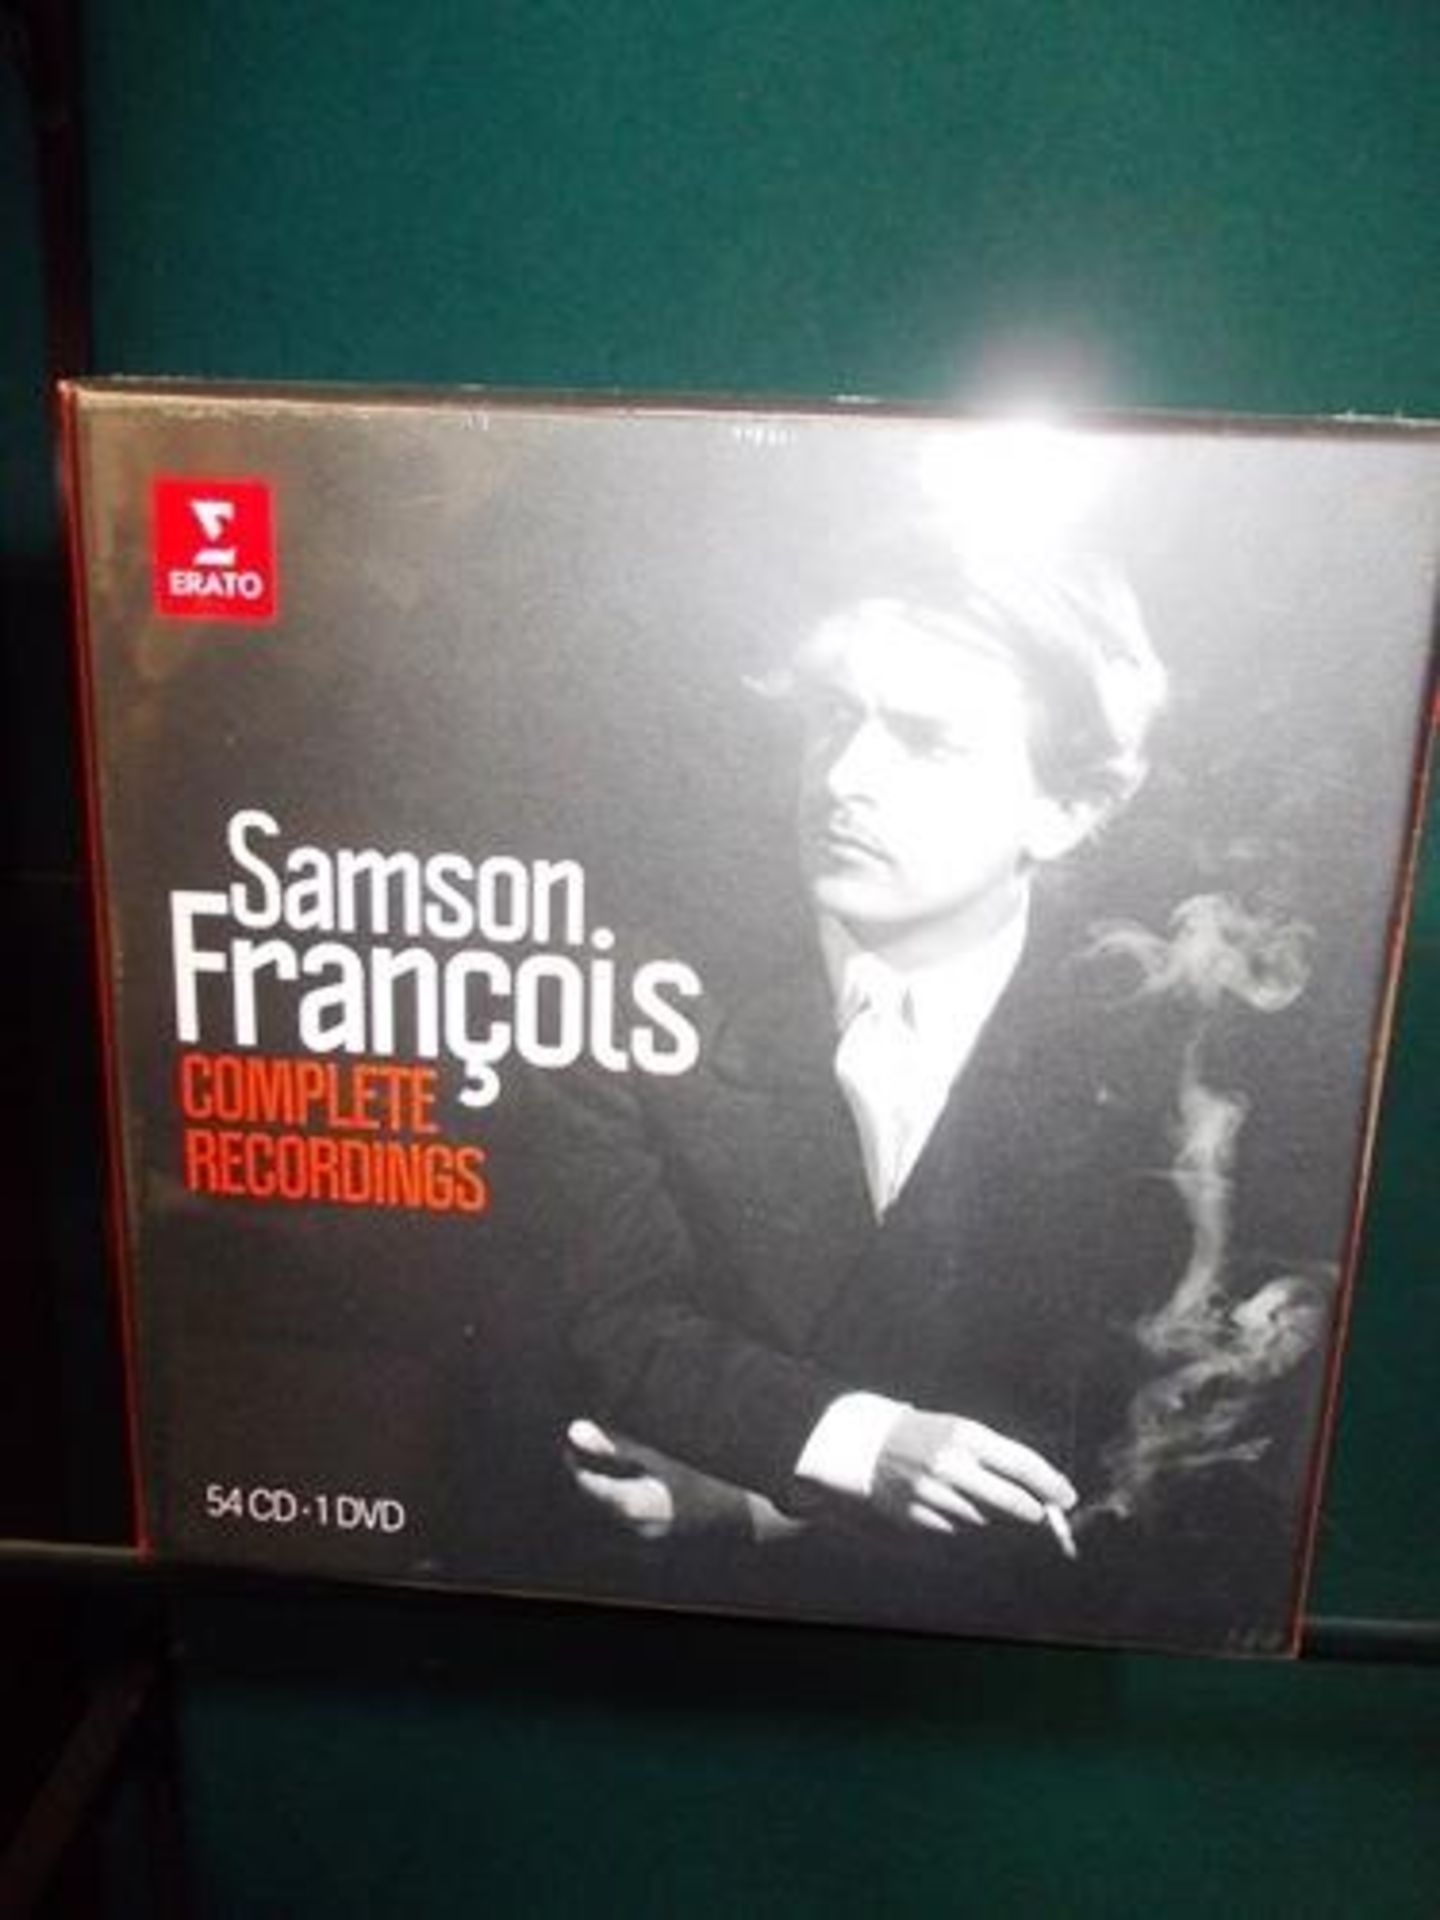 1 x Samson Francois complete recordings, RRP £85.00 - Sealed new in box (FC7)